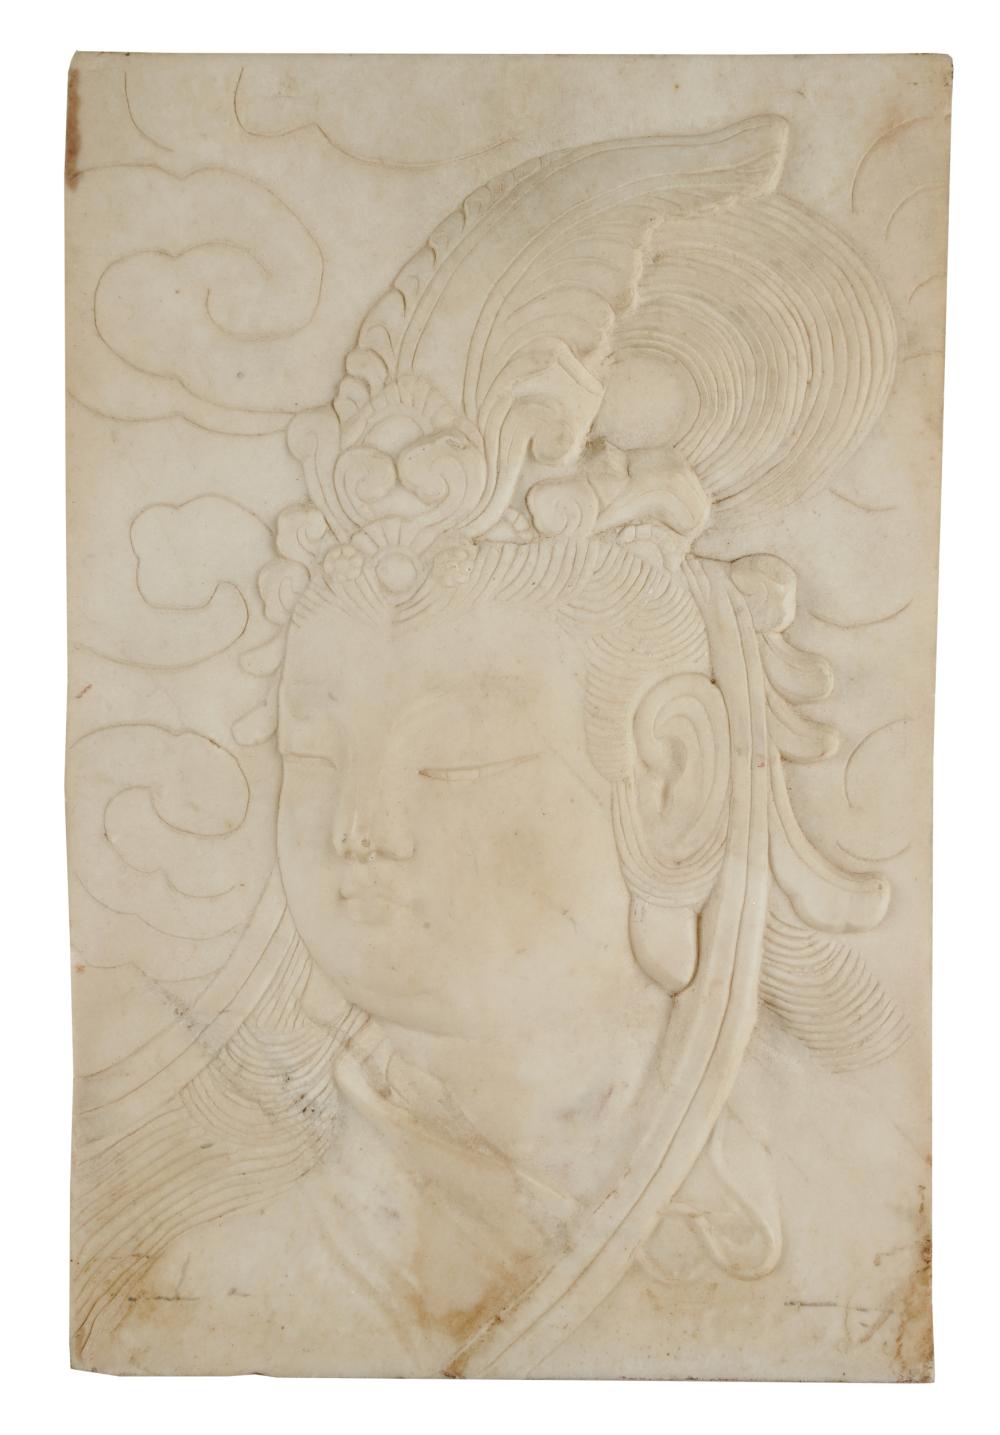 CHINESE CARVED MARBLE PLAQUEdepicting